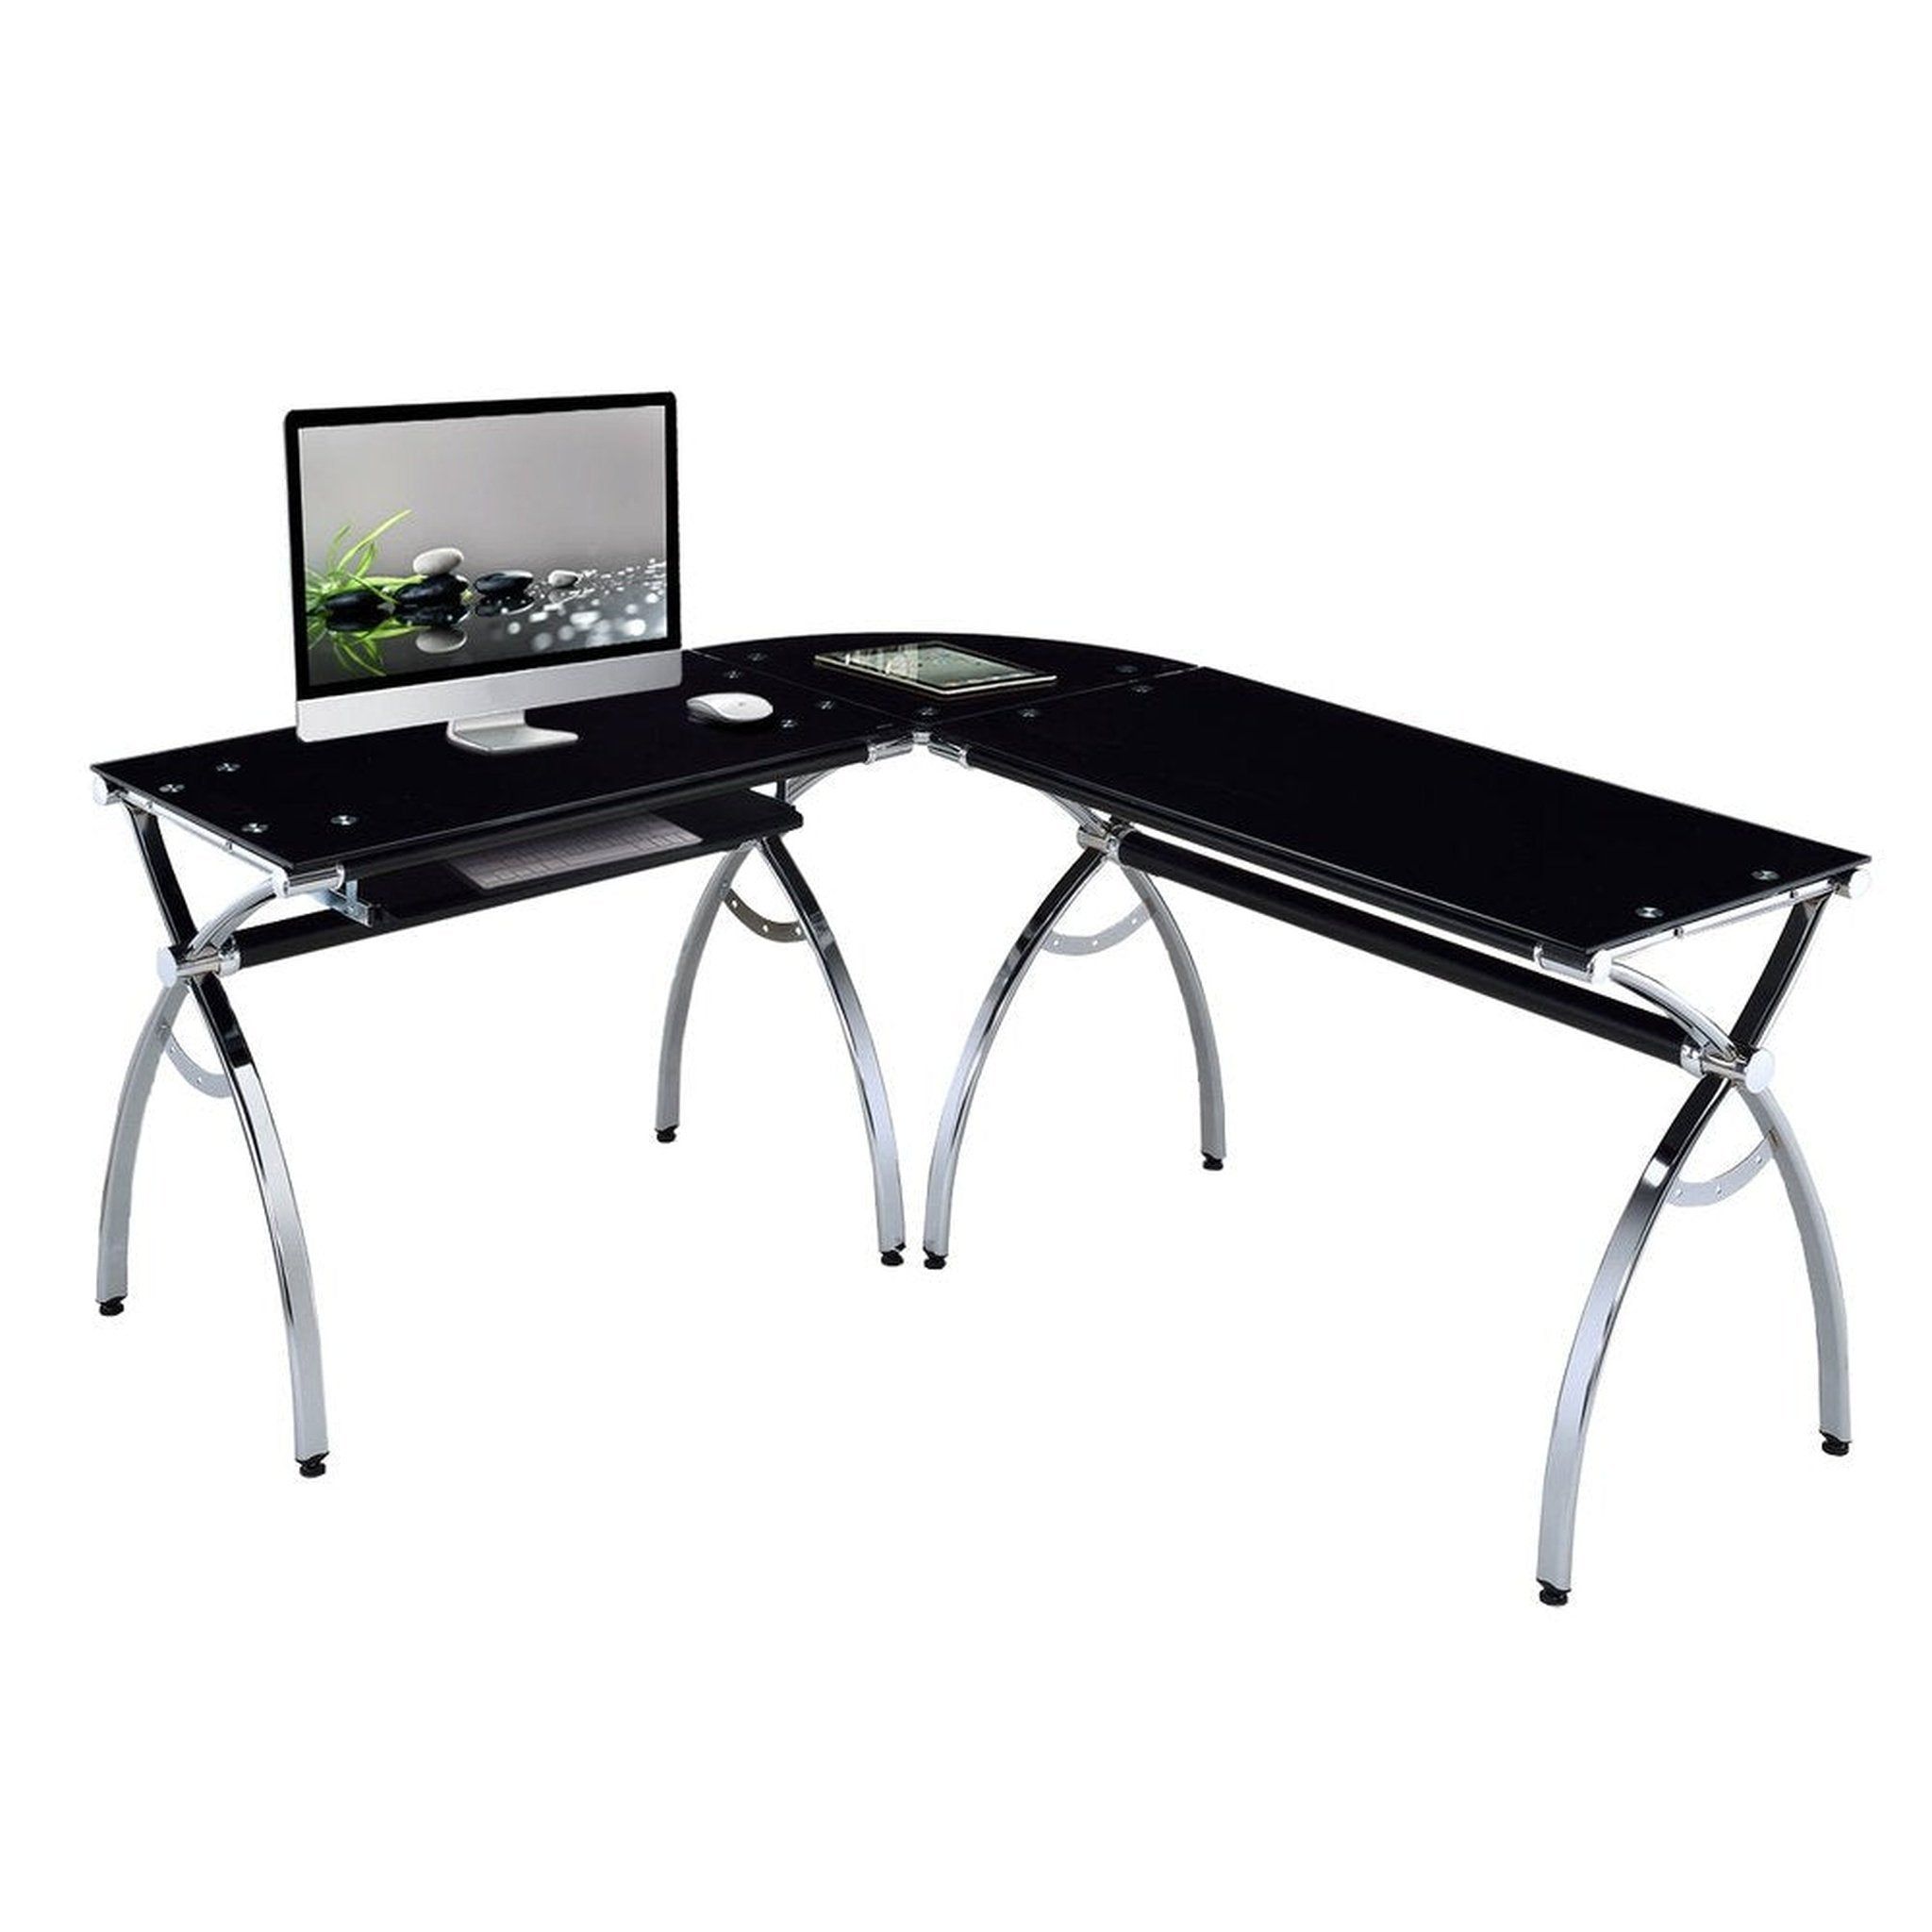 Upgrade Your Home Office with a Sleek Modern Curved Shaped Glass Computer Desk